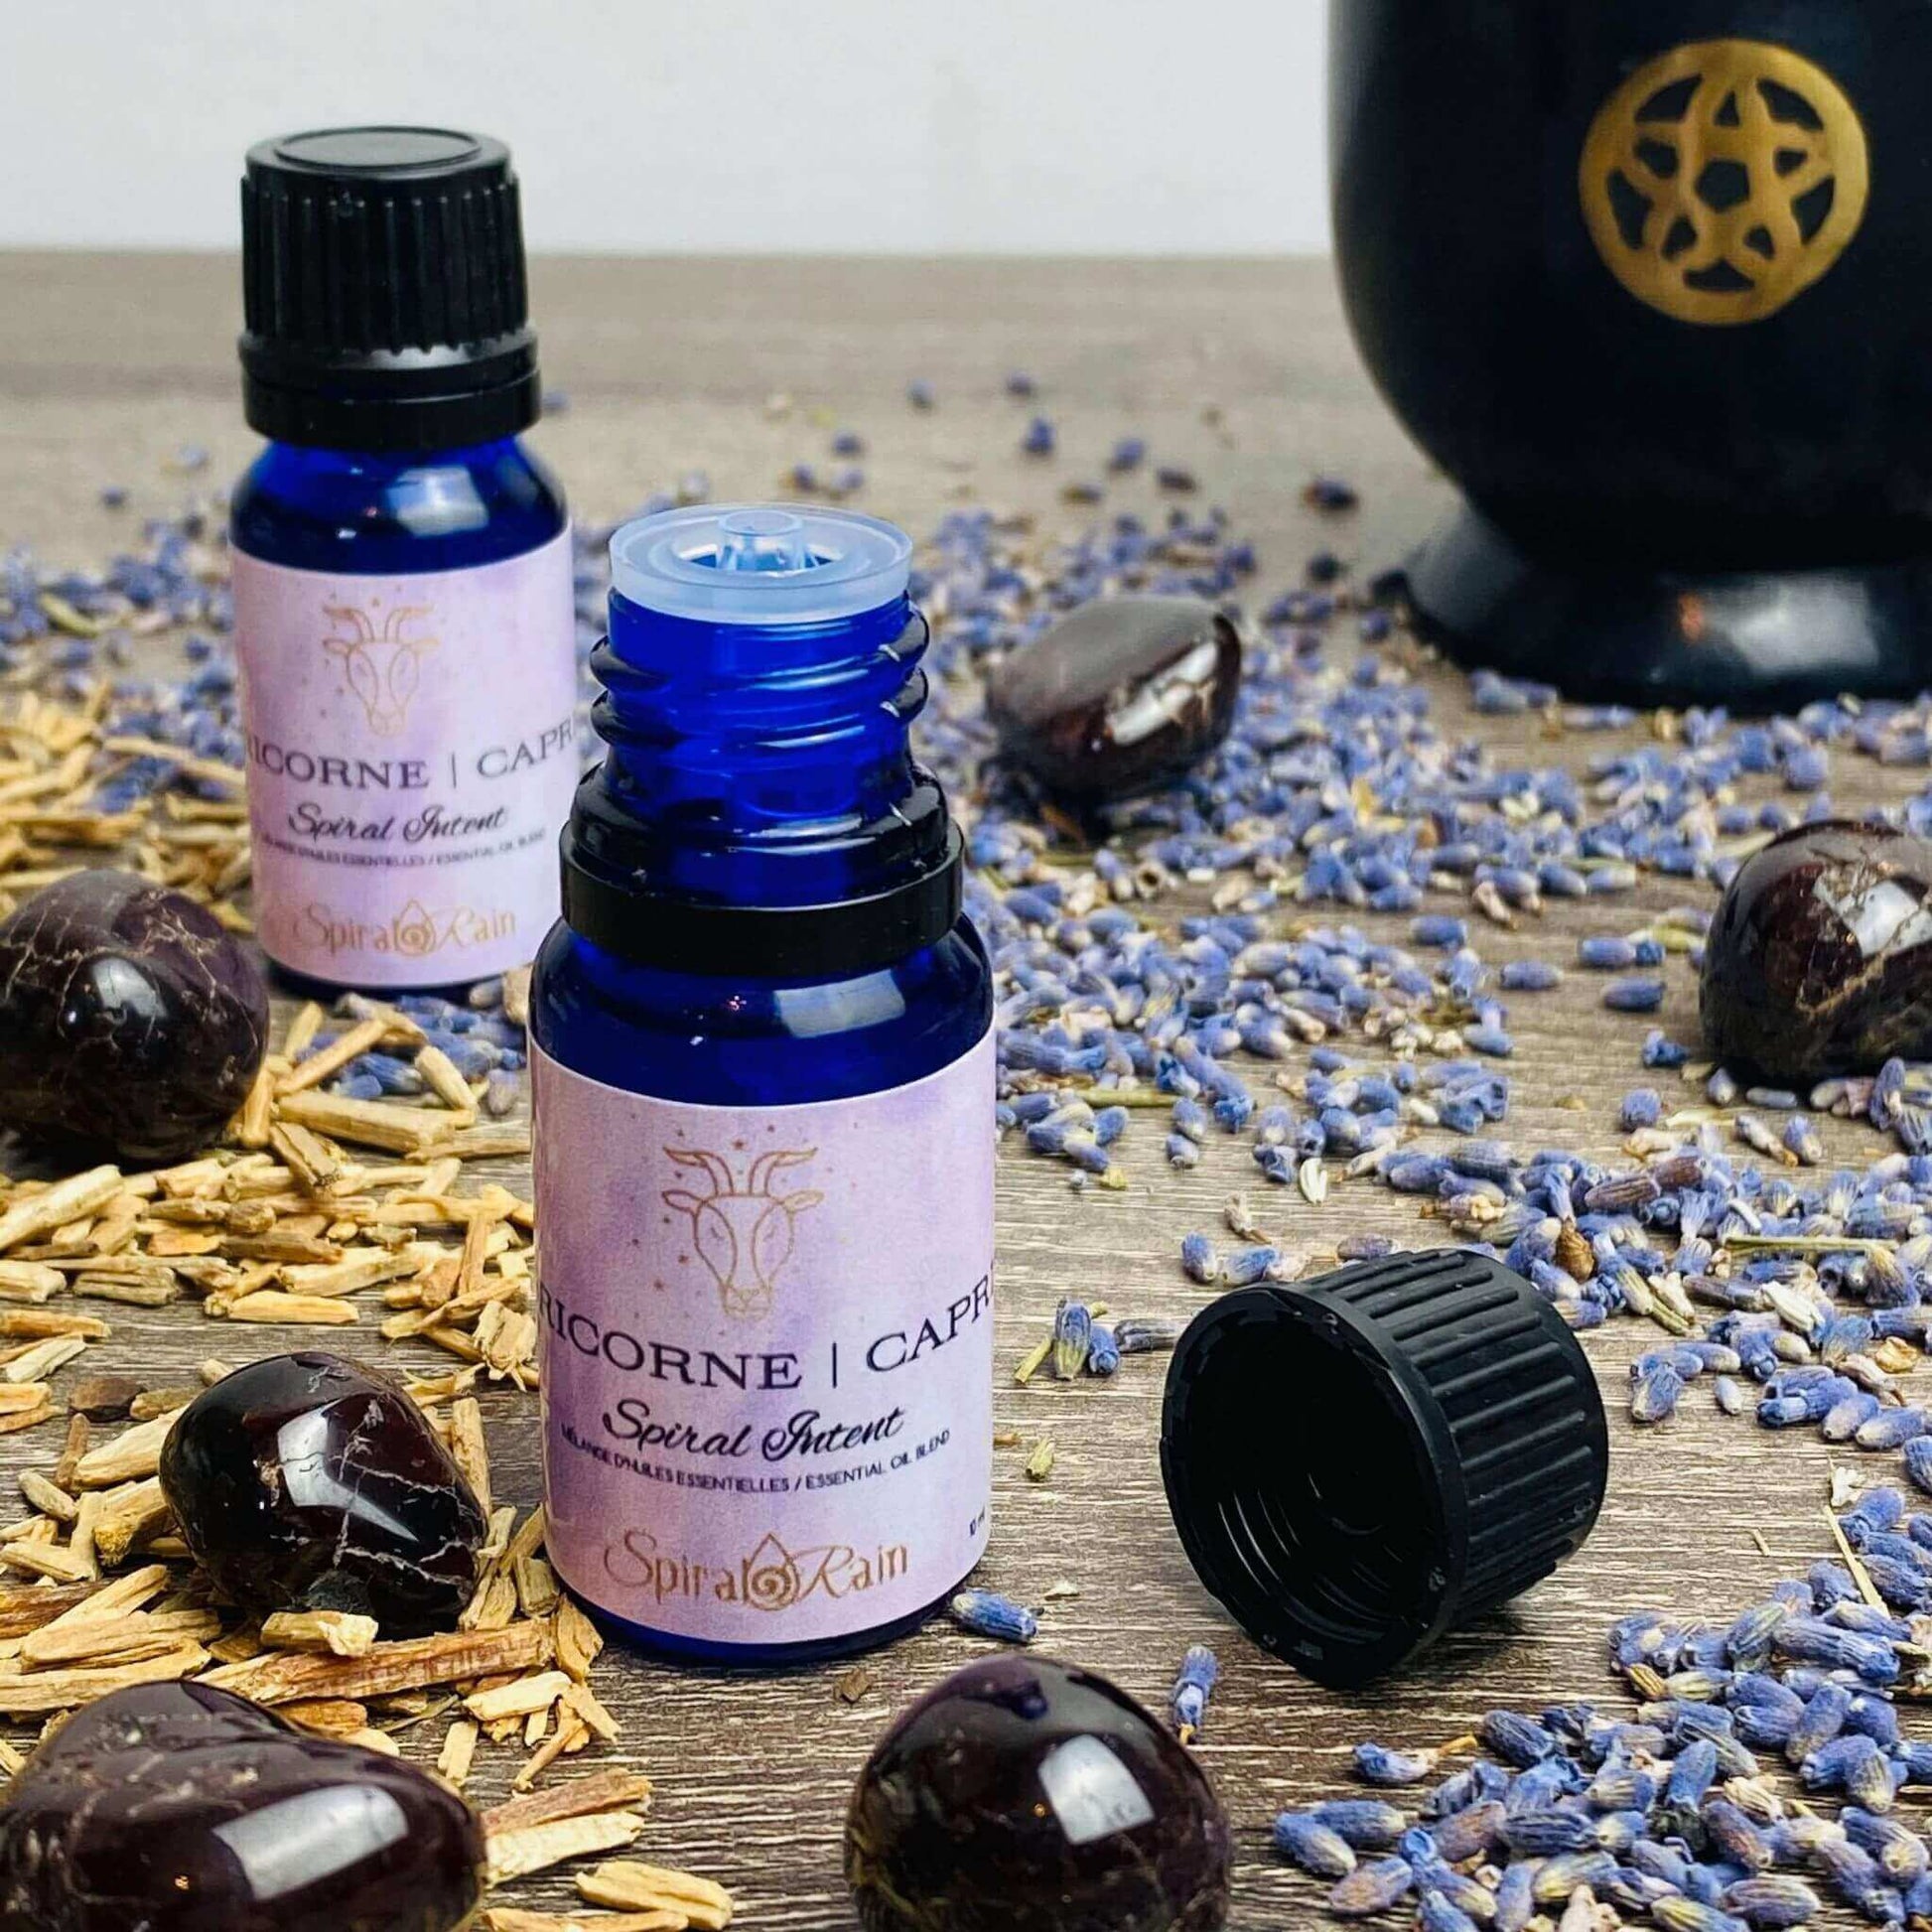 Capricorn (Dec 22 - Jan 19) oil and Perfume 10 ml at $15 only from Spiral Rain